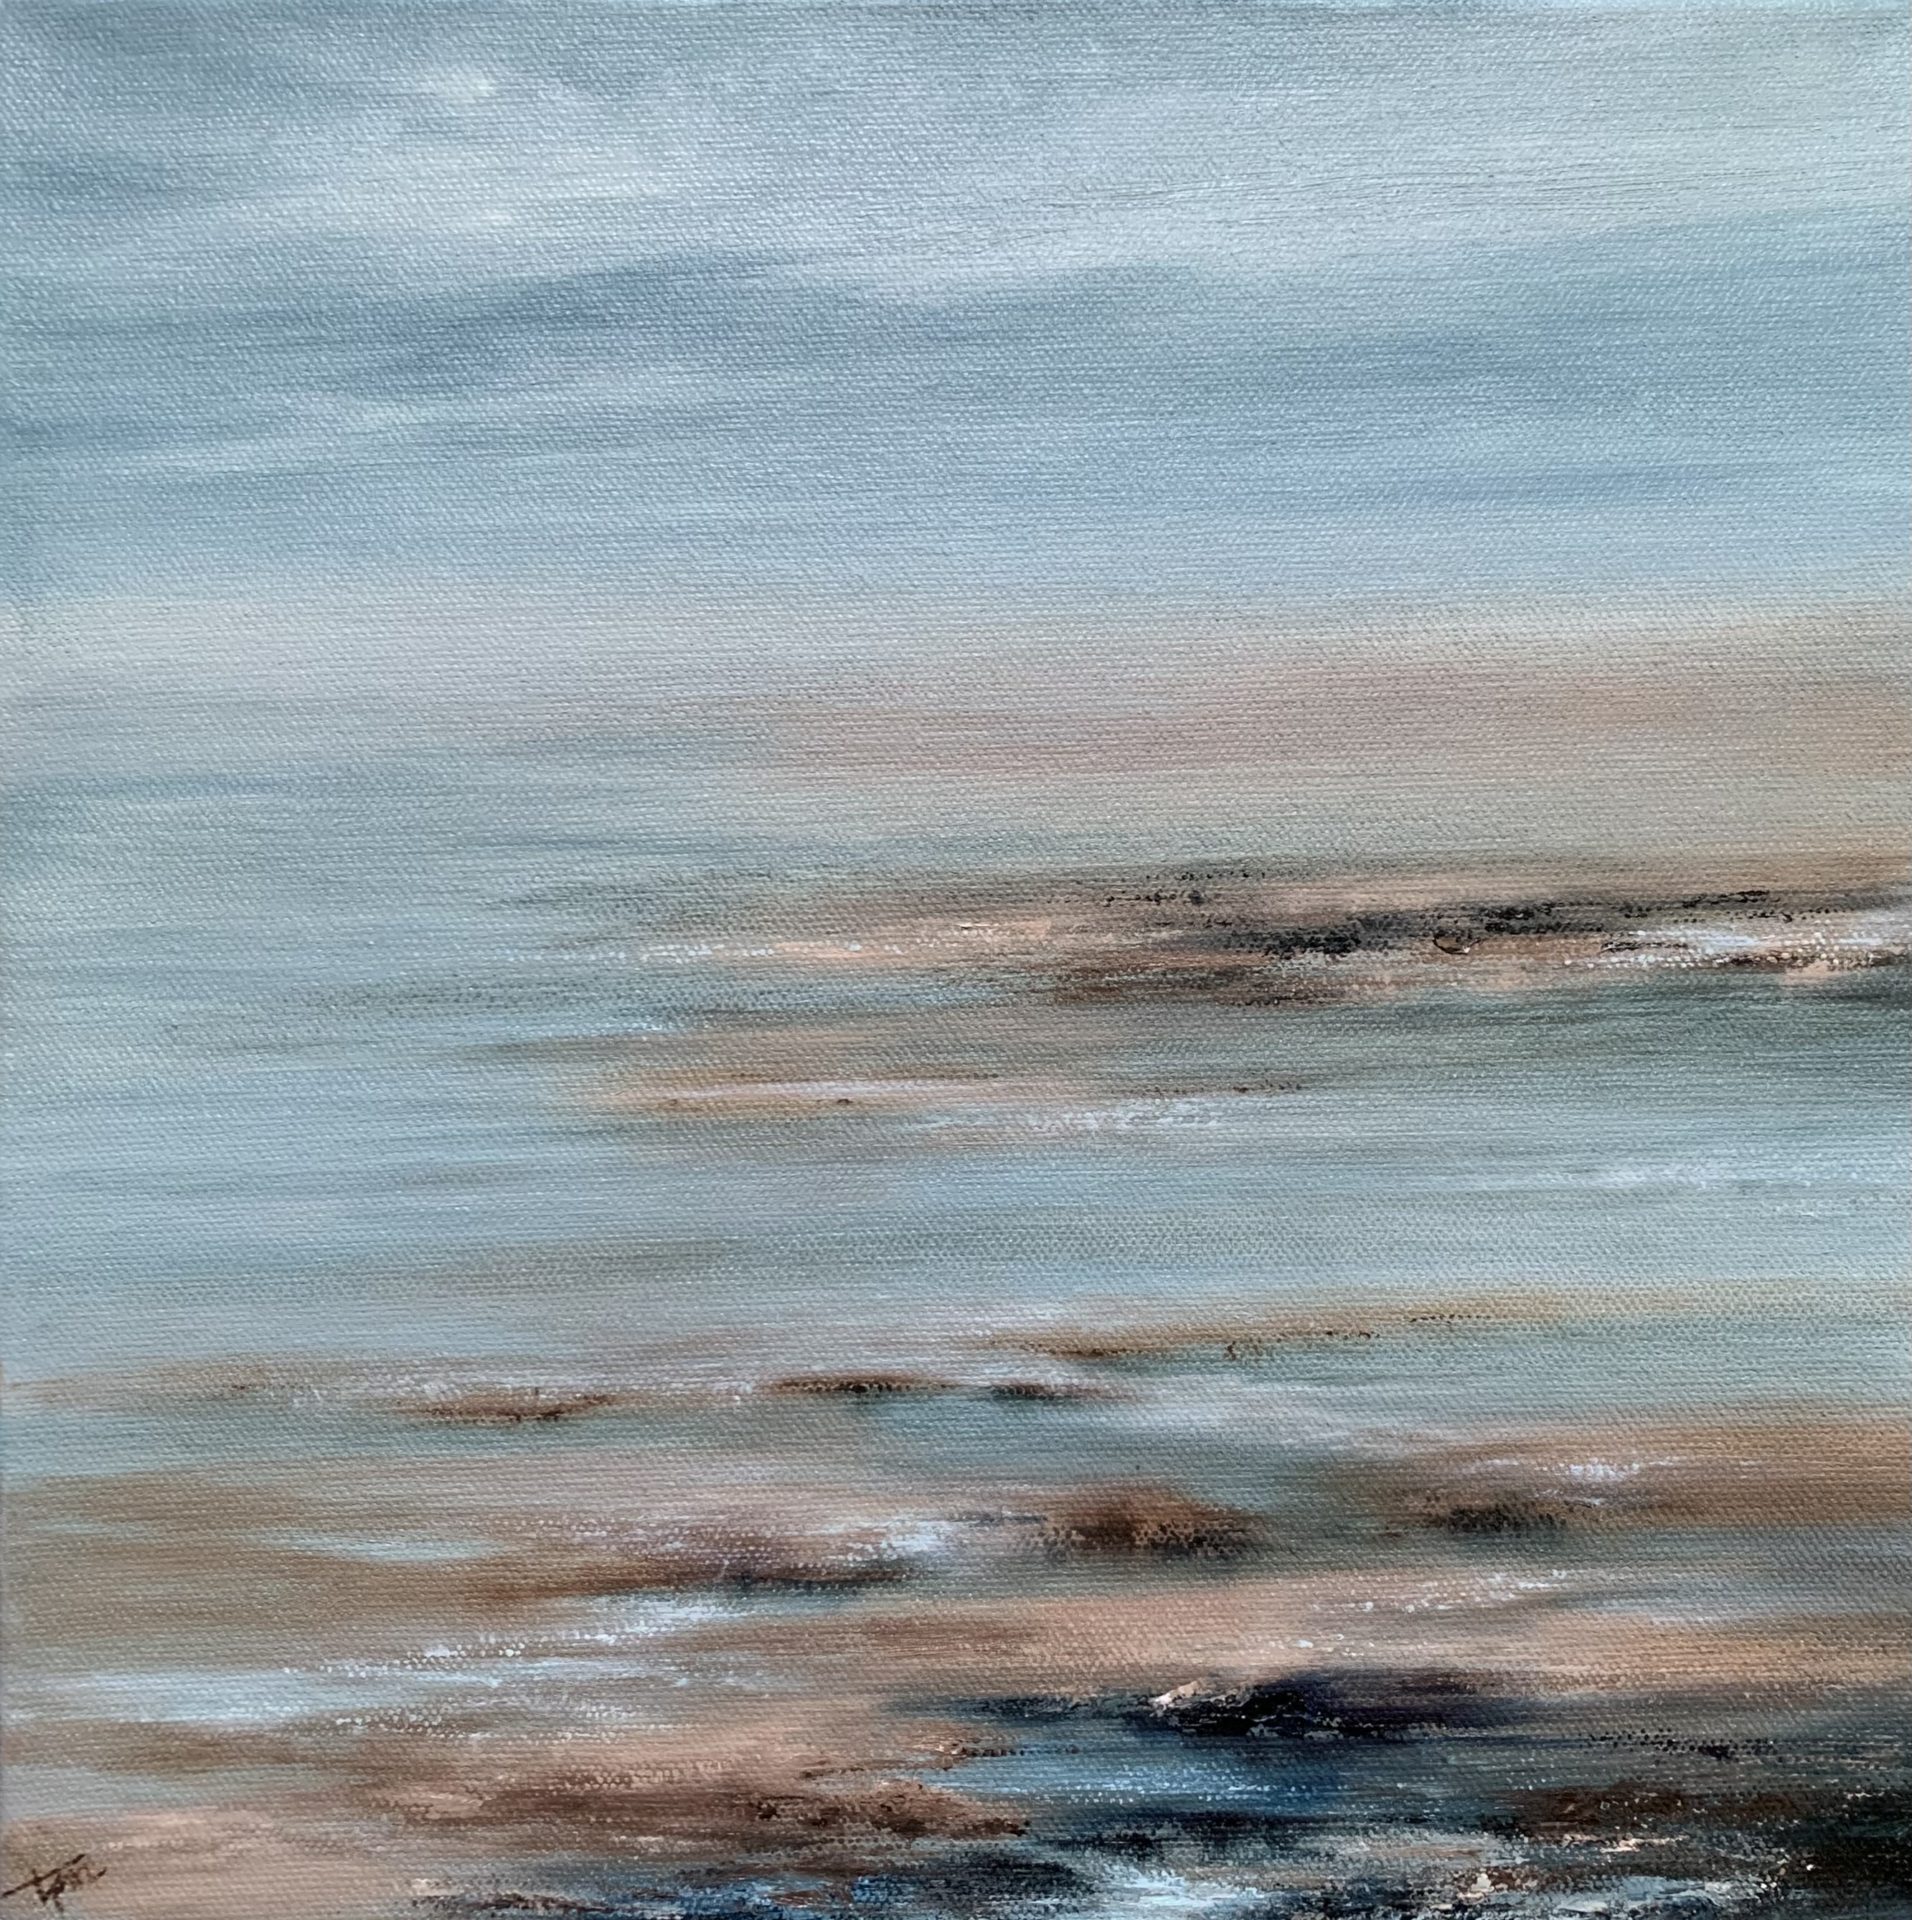 Photo of original seascape oil painting by Tisha Mark, "Tide Pools III" 12"x12 oil on canvas (2022). Seascape painting in cool blues and grays with contrasting warm tones of brown featuring textures found in tide pools during a wintertime visit to a beach.